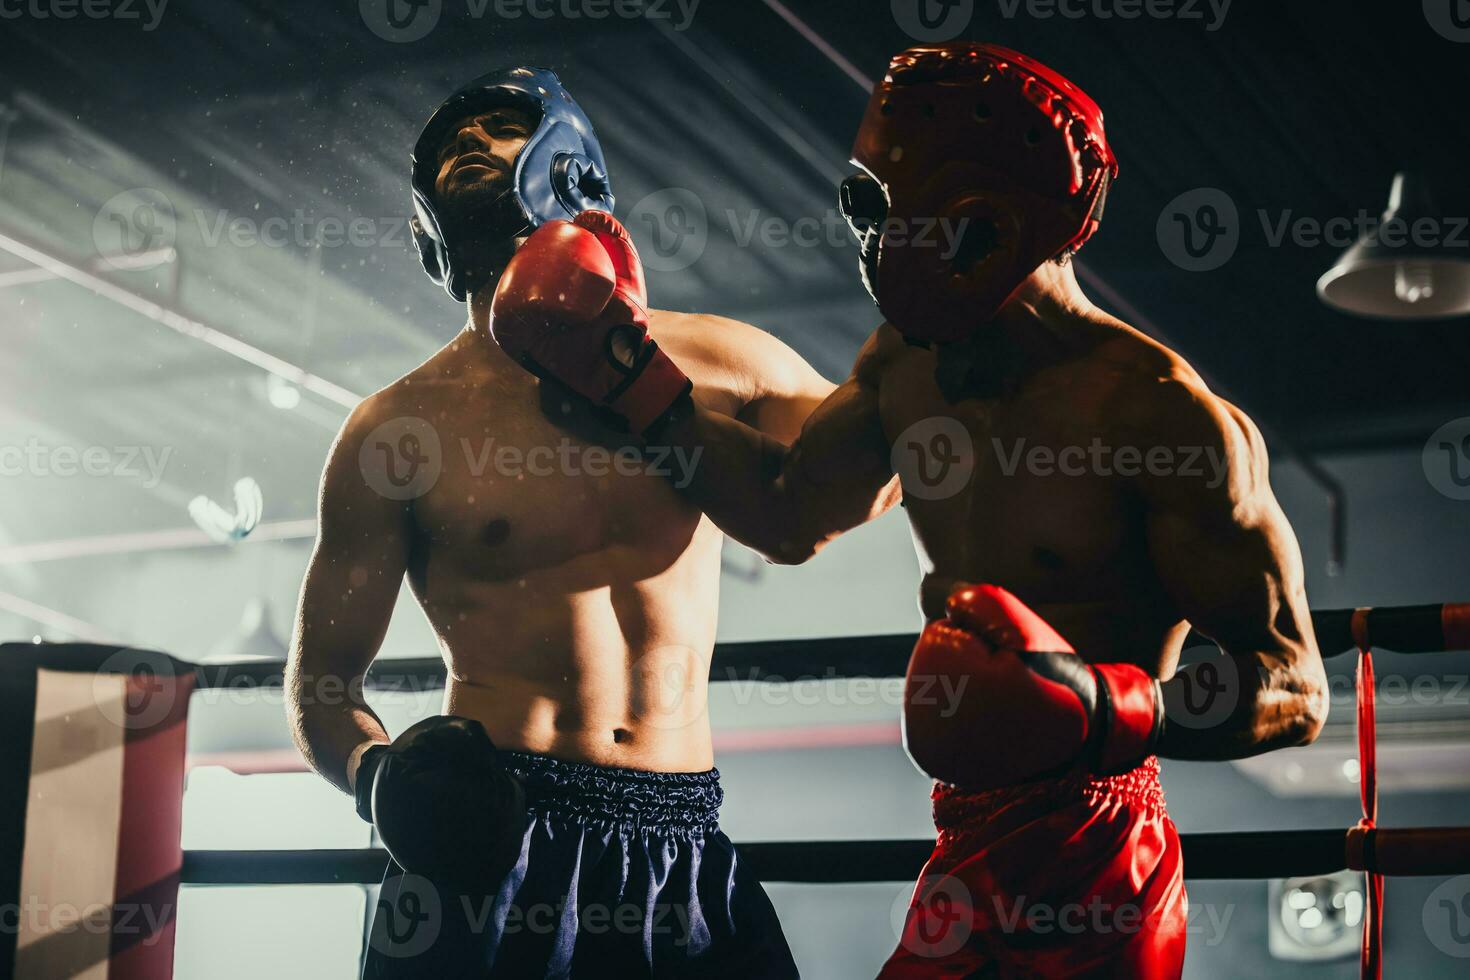 Boxer use various punch combinations, including the jab, hook, uppercut, cross, swing, straight. Getting in close to make opponent on ropes and knockout. Boxing champions win the round in boxing ring photo